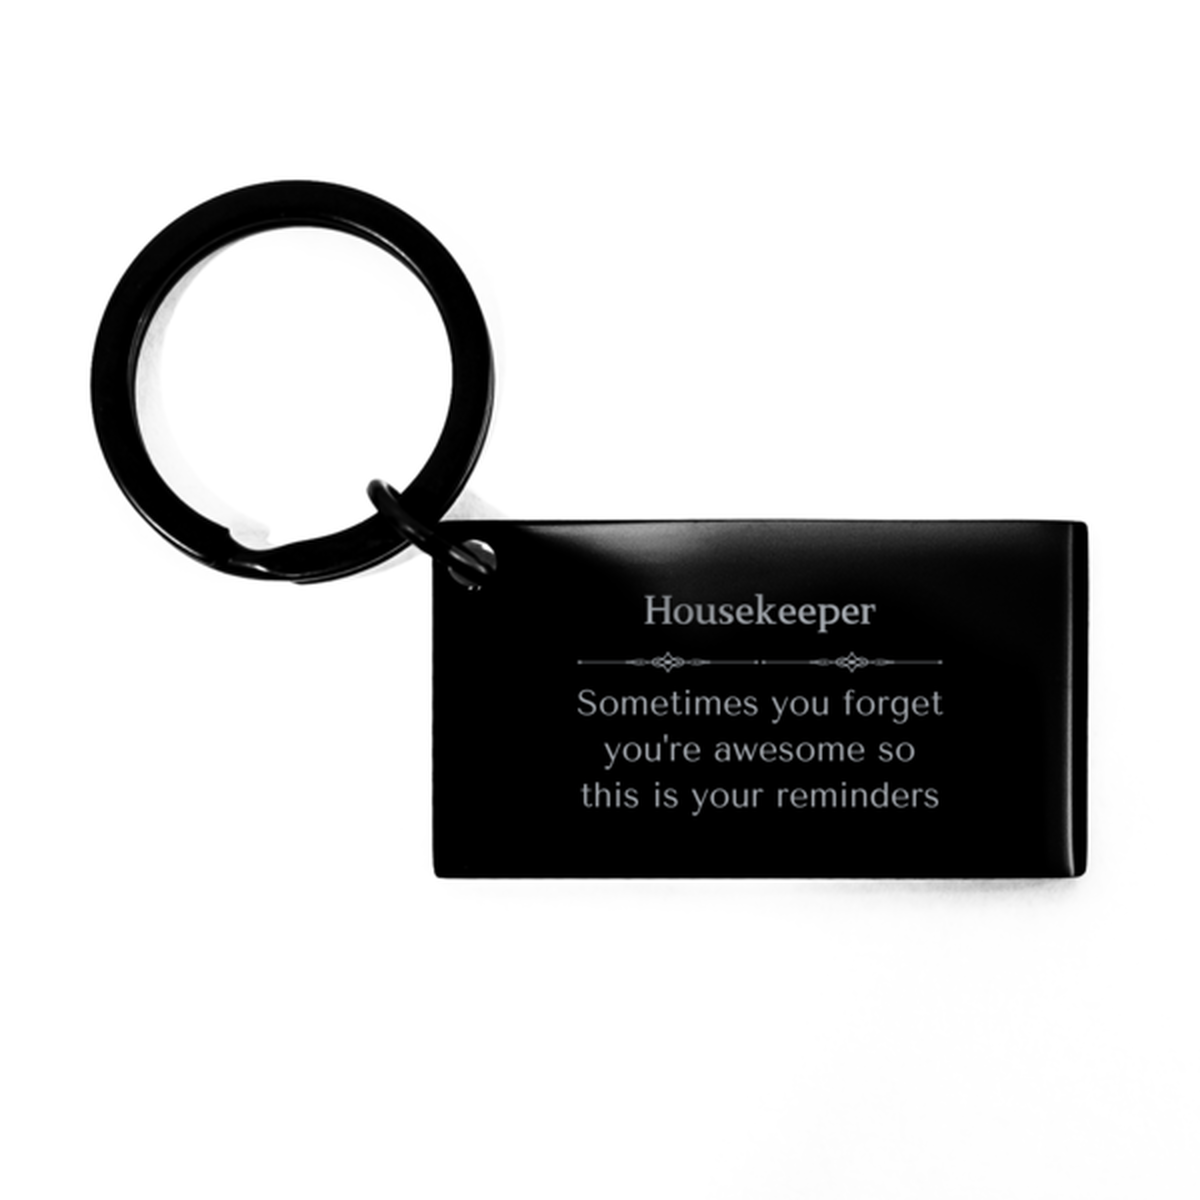 Sentimental Housekeeper Keychain, Microbiologist Sometimes you forget you're awesome so this is your reminders, Graduation Christmas Birthday Gifts for Housekeeper, Men, Women, Coworkers